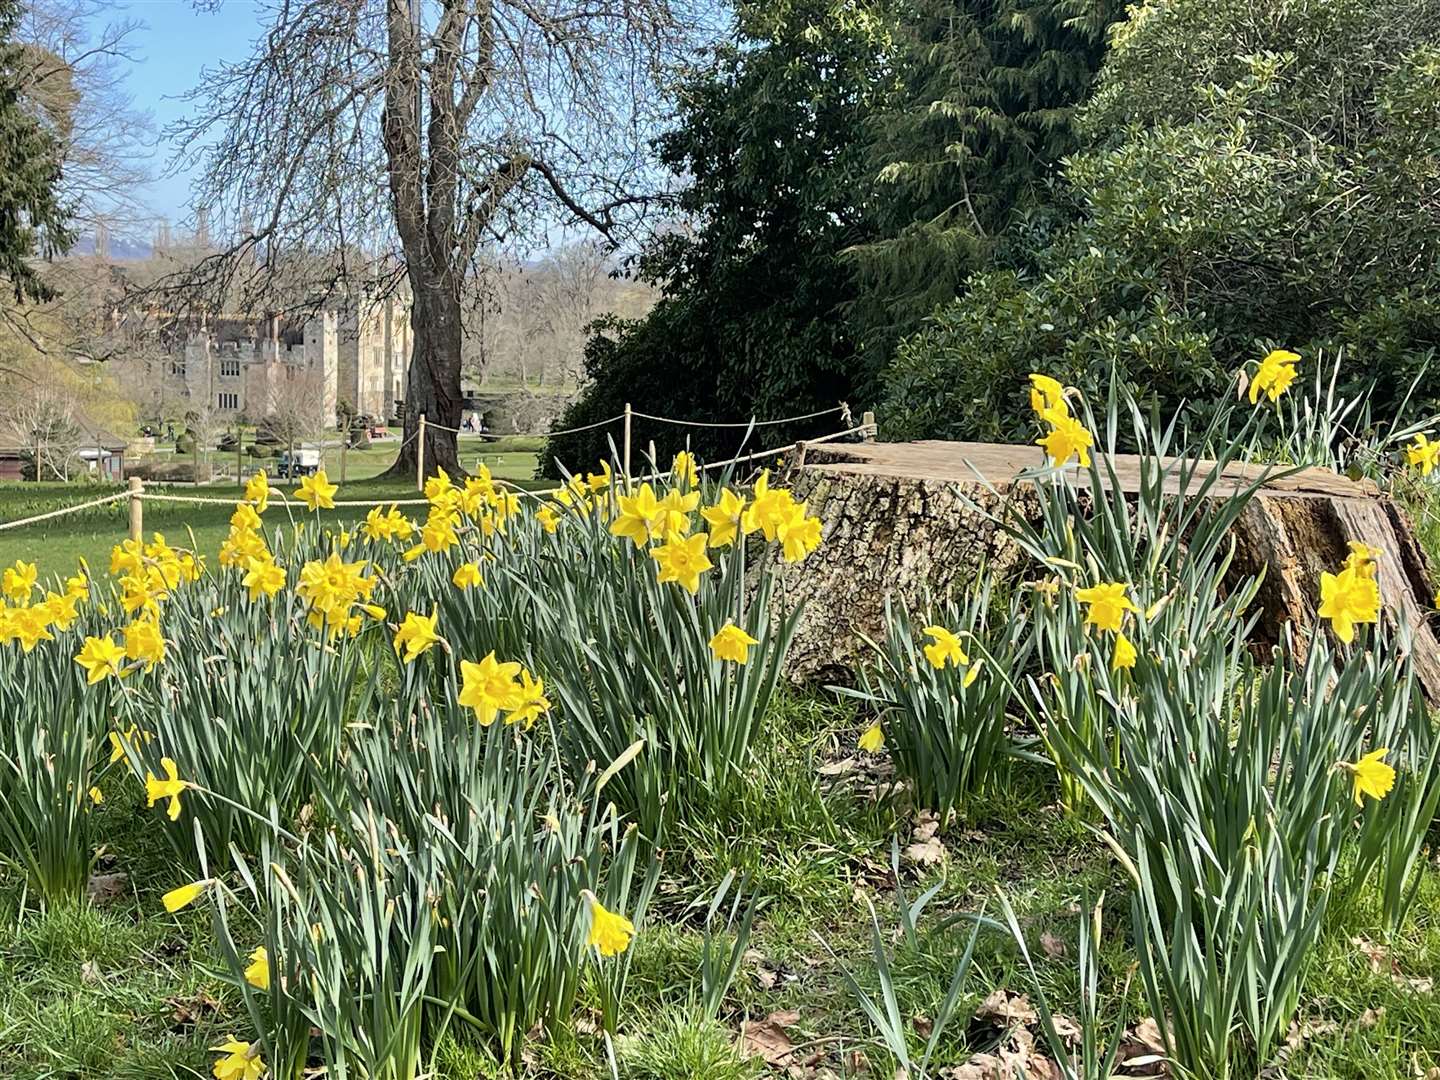 Spring is in bloom at Hever Castle. Picture: Vikki Rimmer